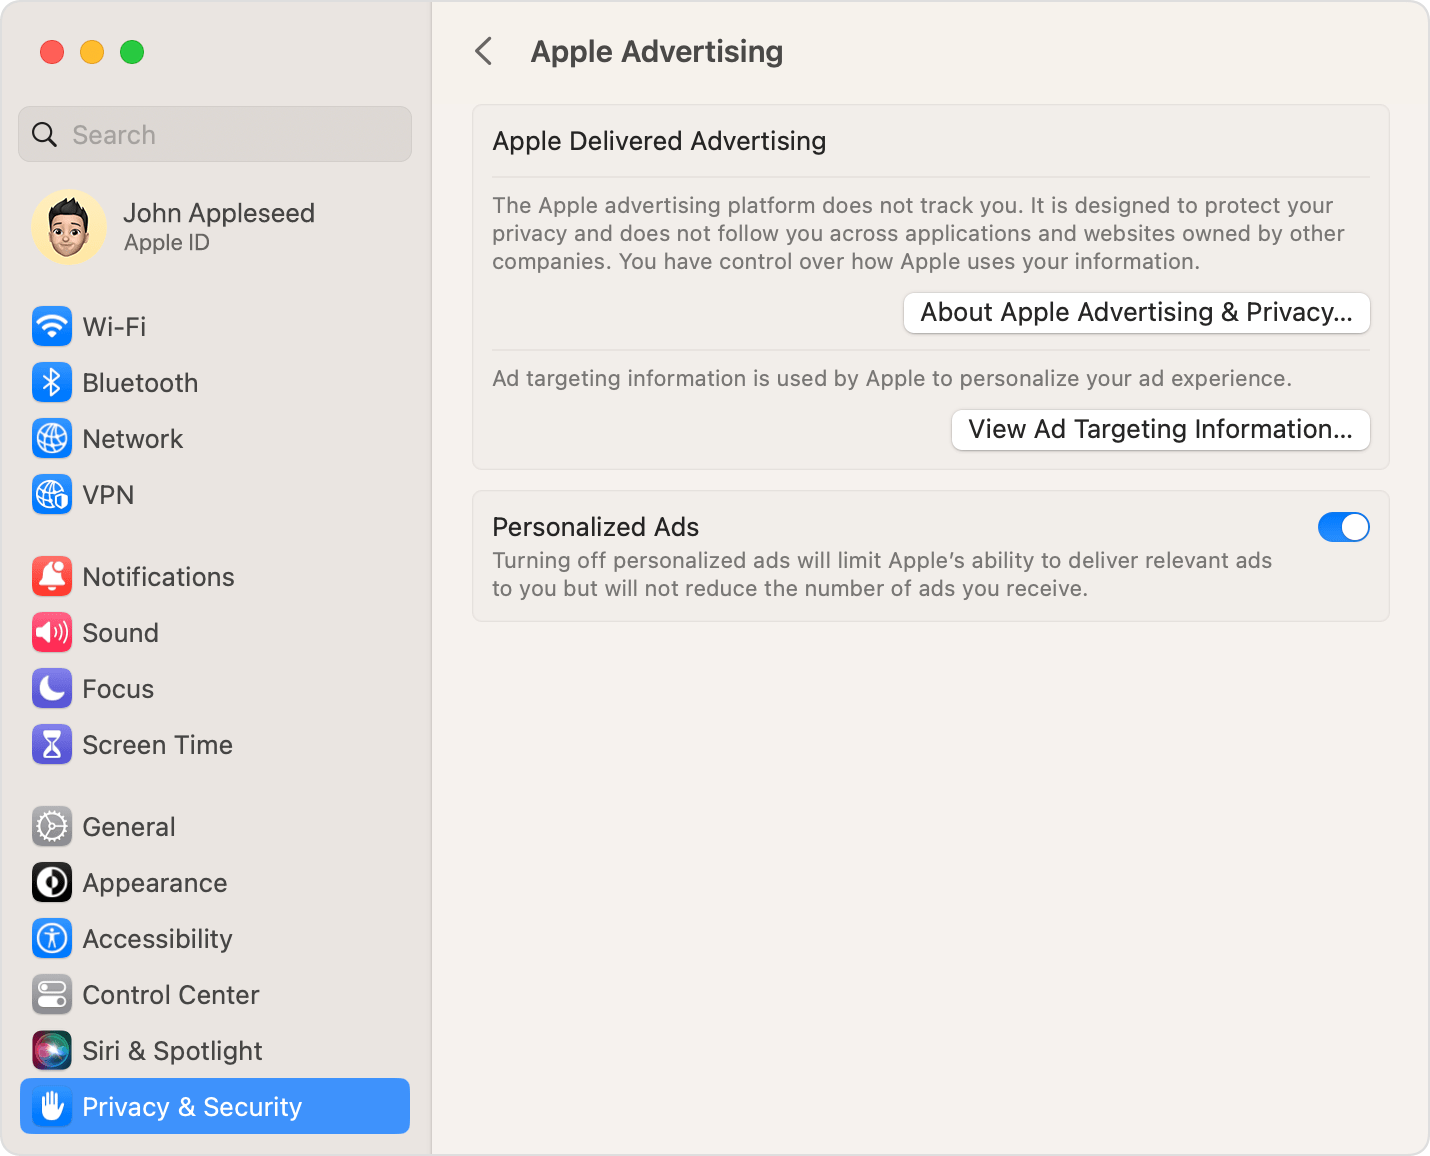 In macOS System Settings, turn off personalized ads